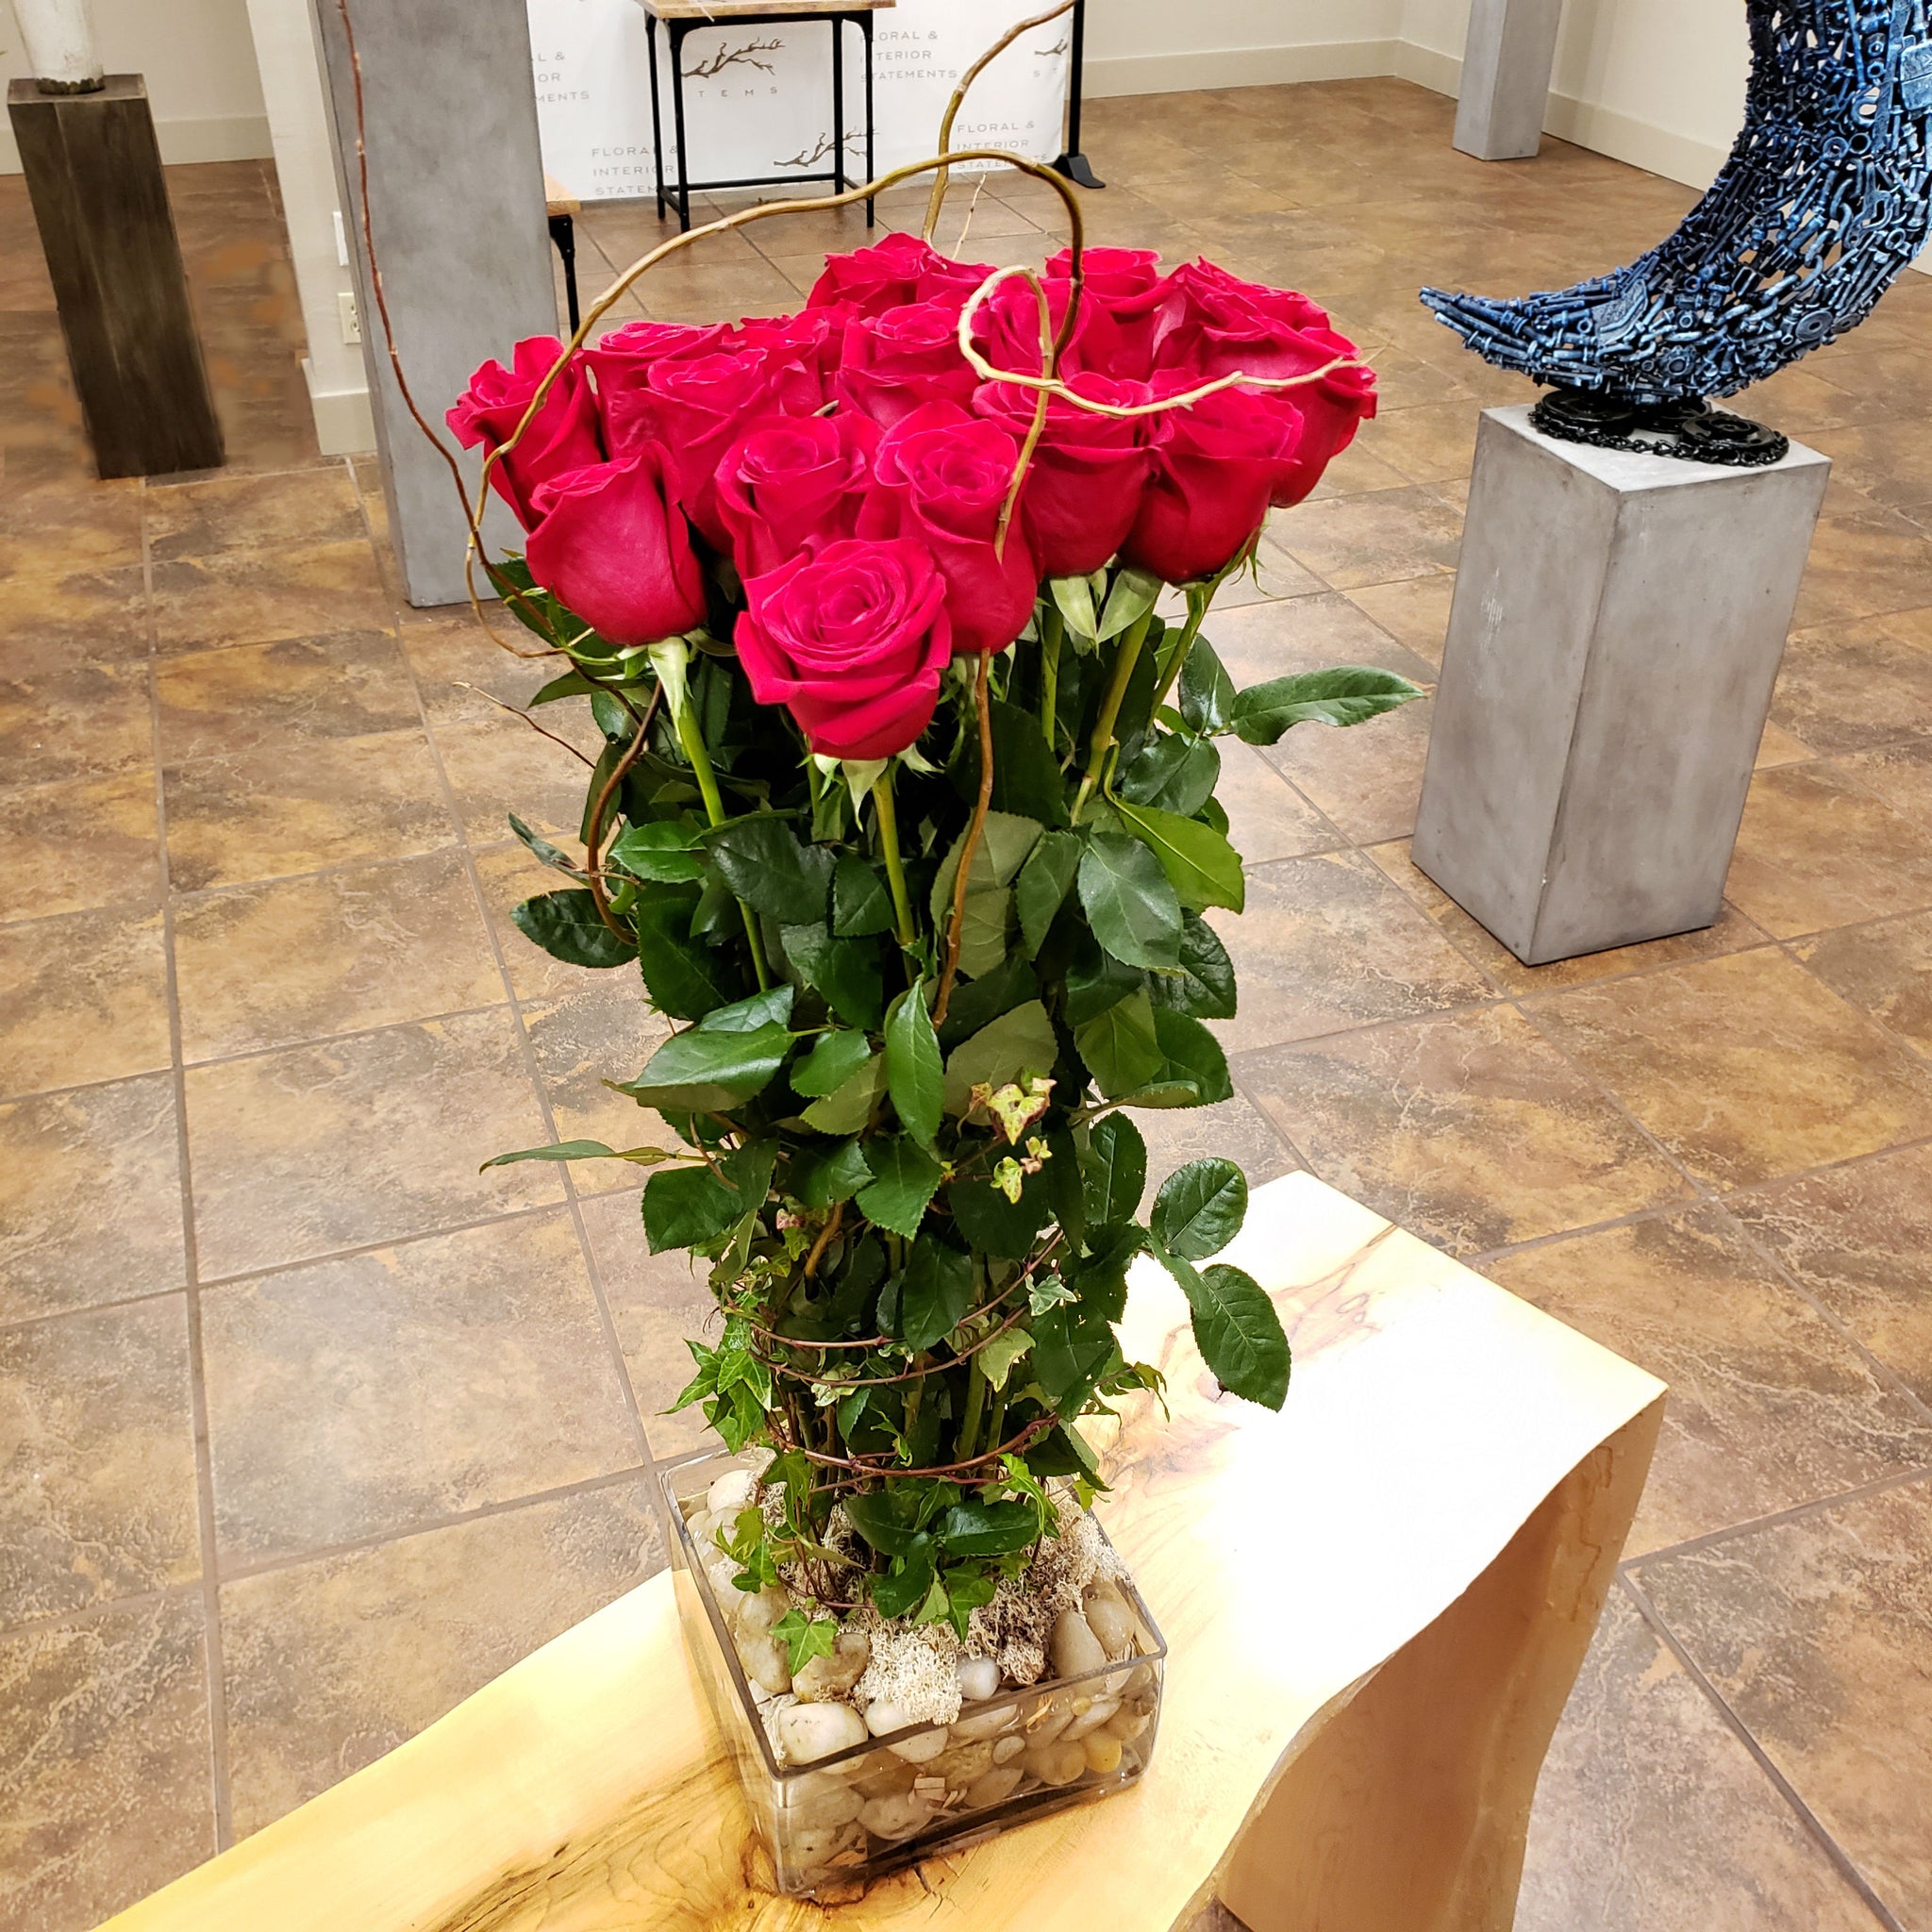 Bunched & semi-exposed roses (2 dozen), curly willow wrap, low profile vase